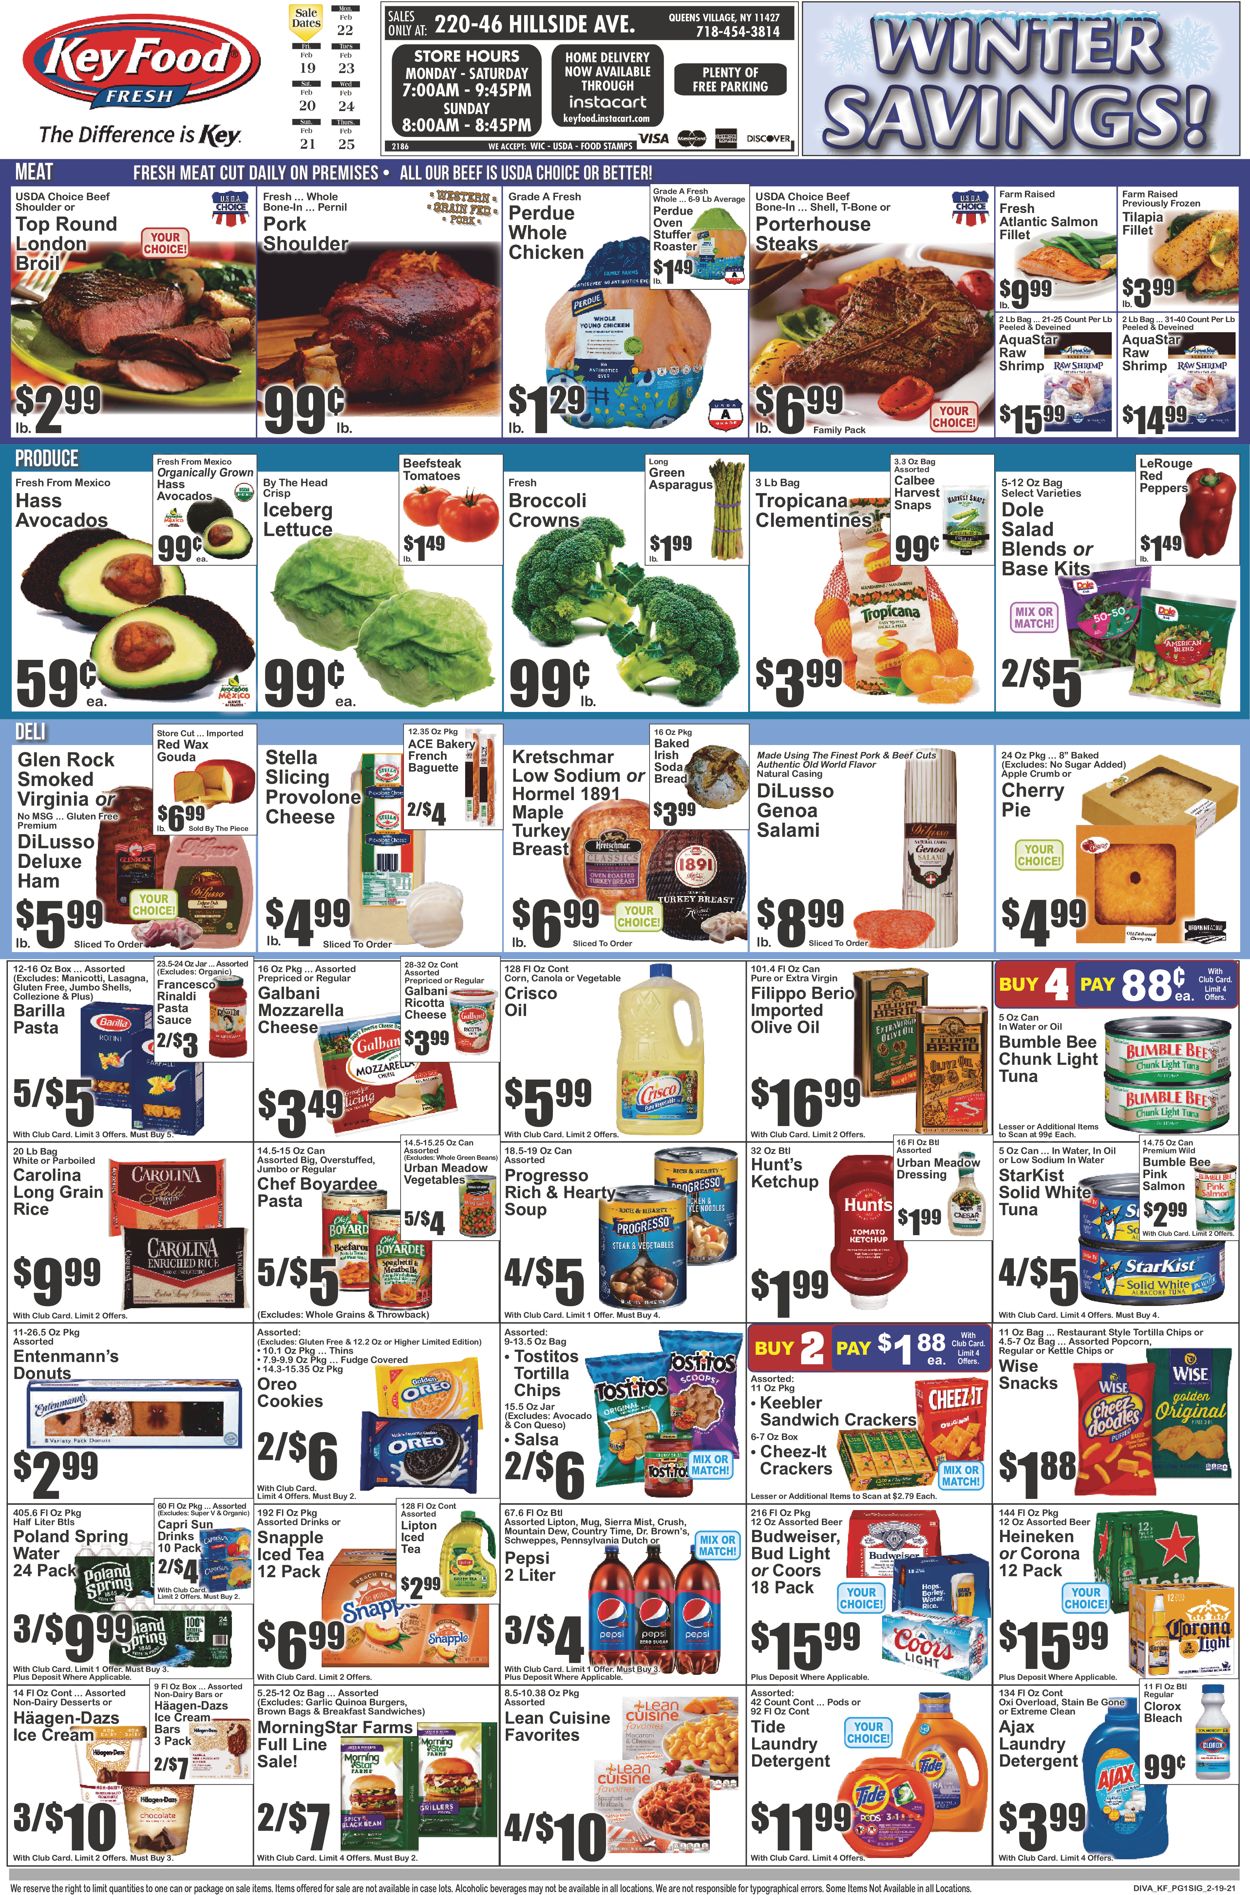 Key Food Current weekly ad 02/19 - 02/25/2021 - frequent-ads.com